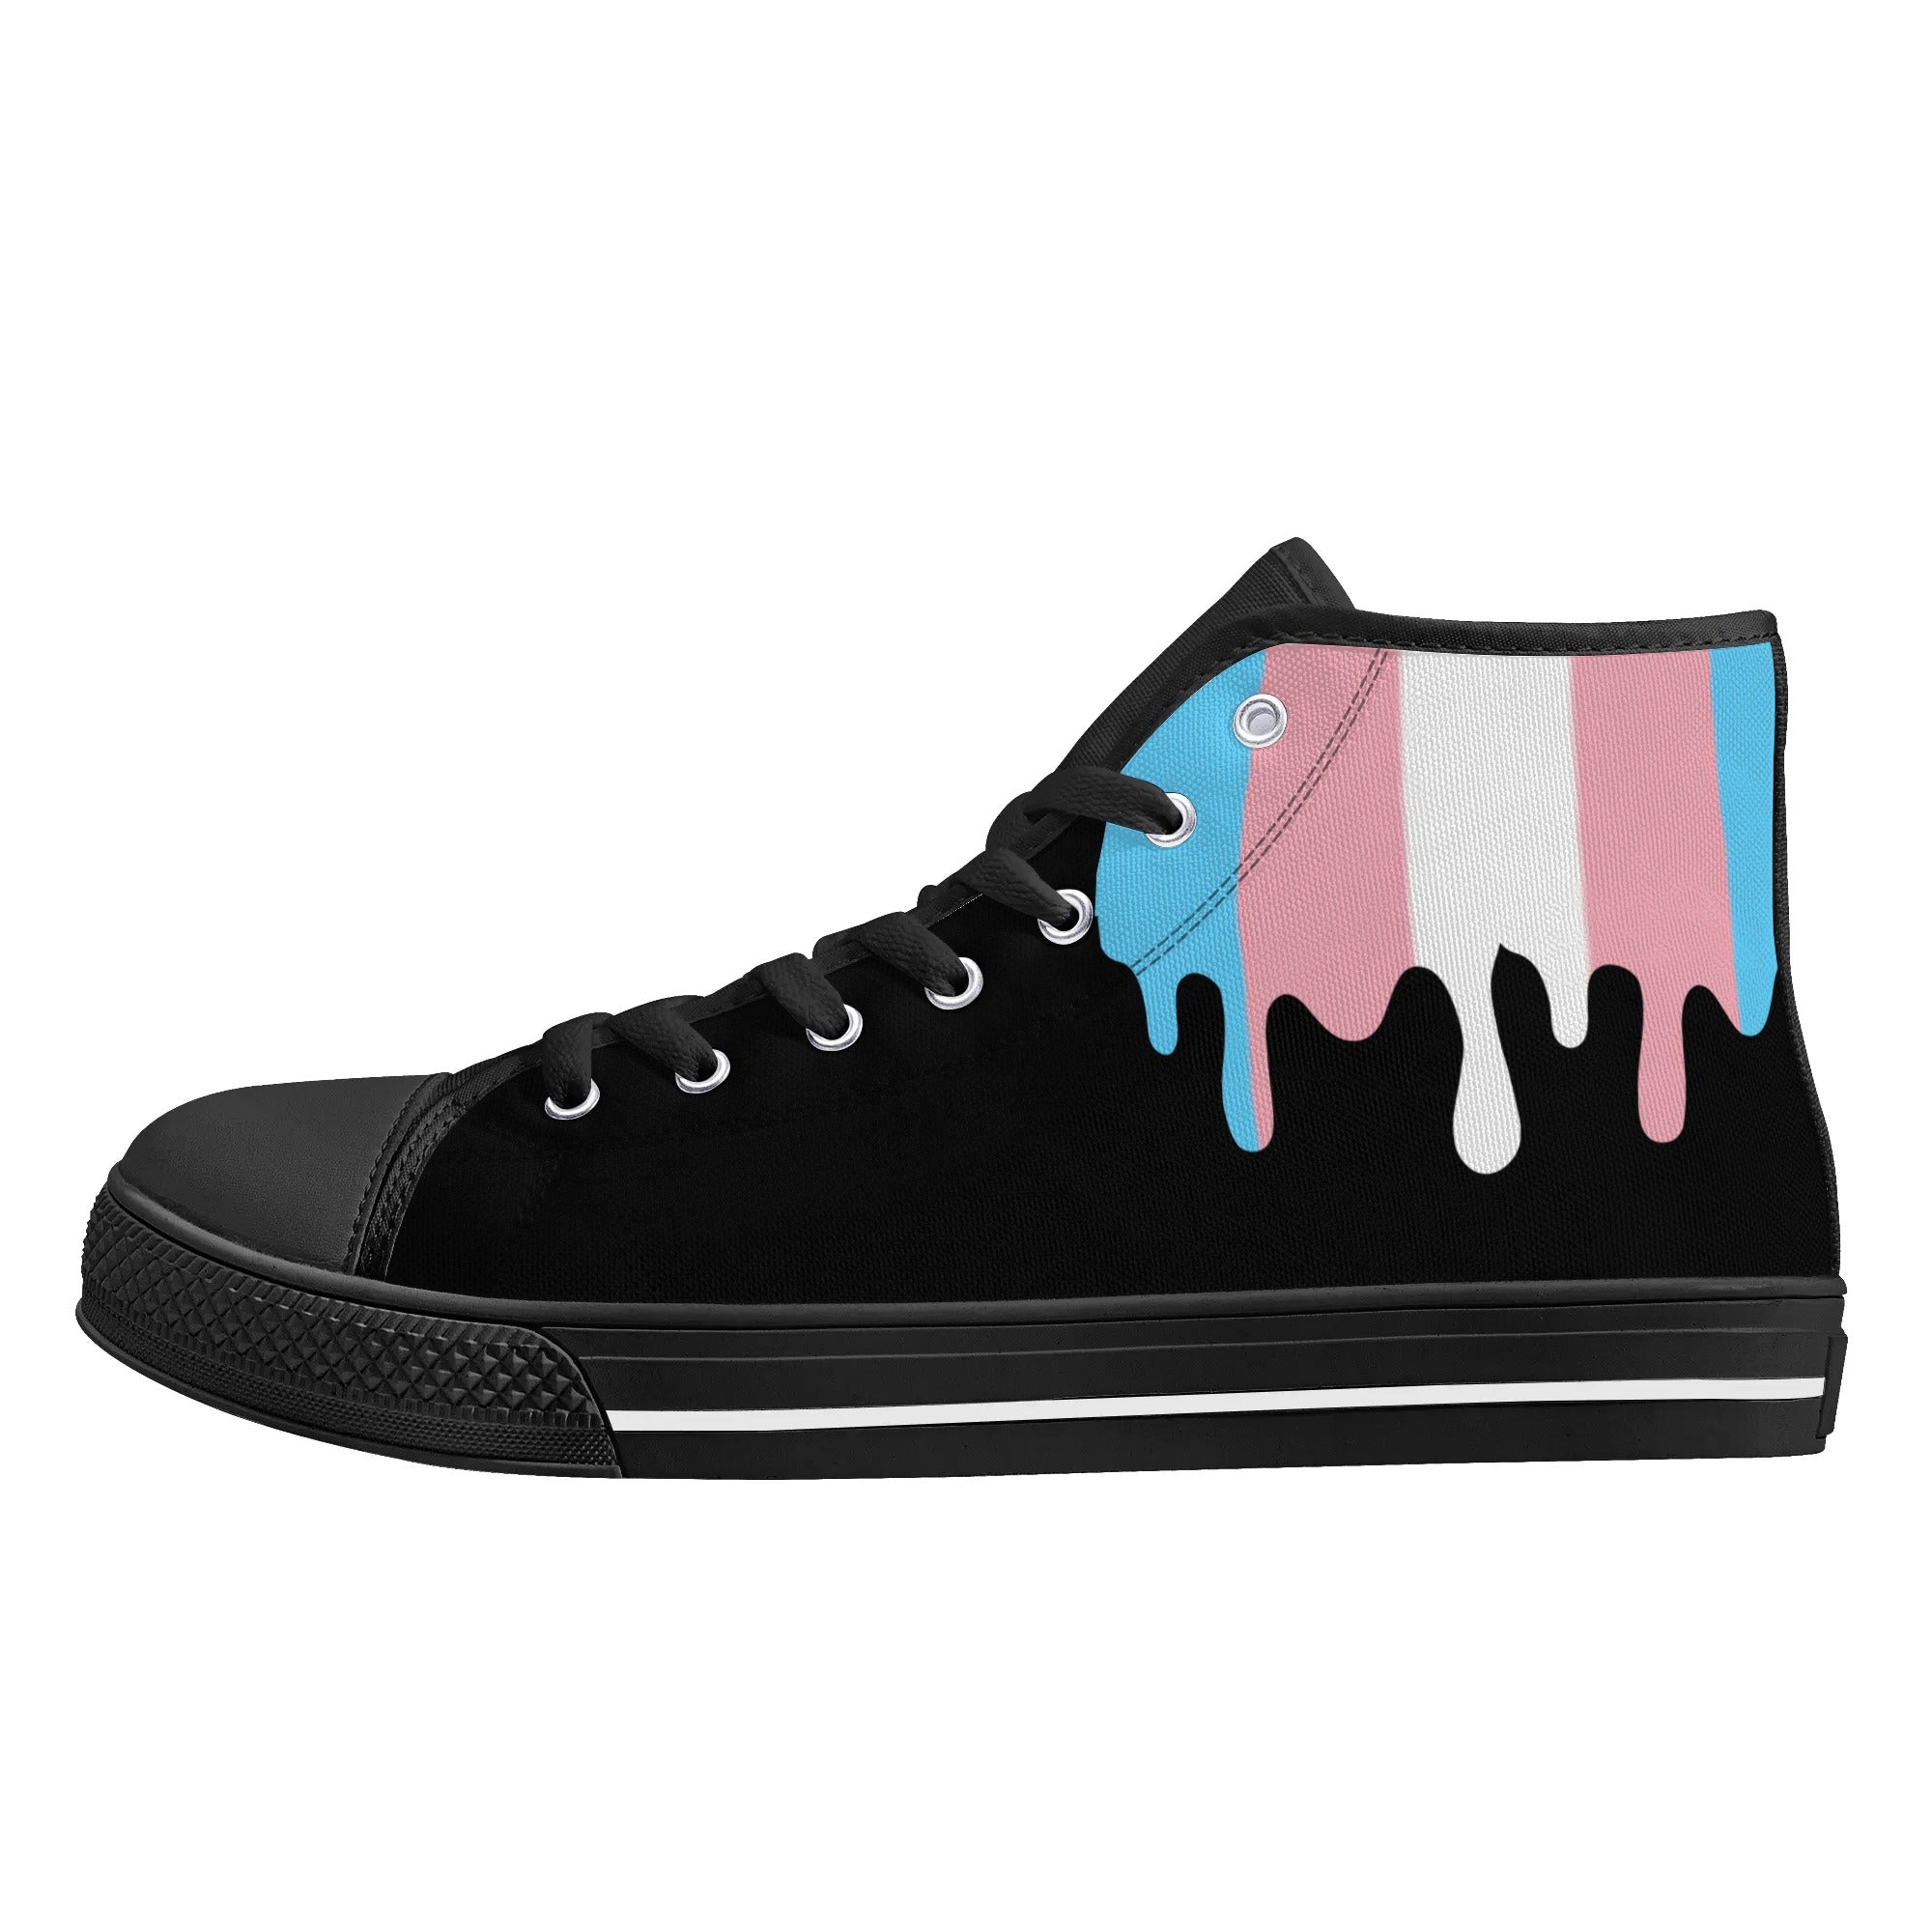 LGBT_Pride-Women’s Size Transgender Drip High Top Sneakers - Rose Gold Co. Shop